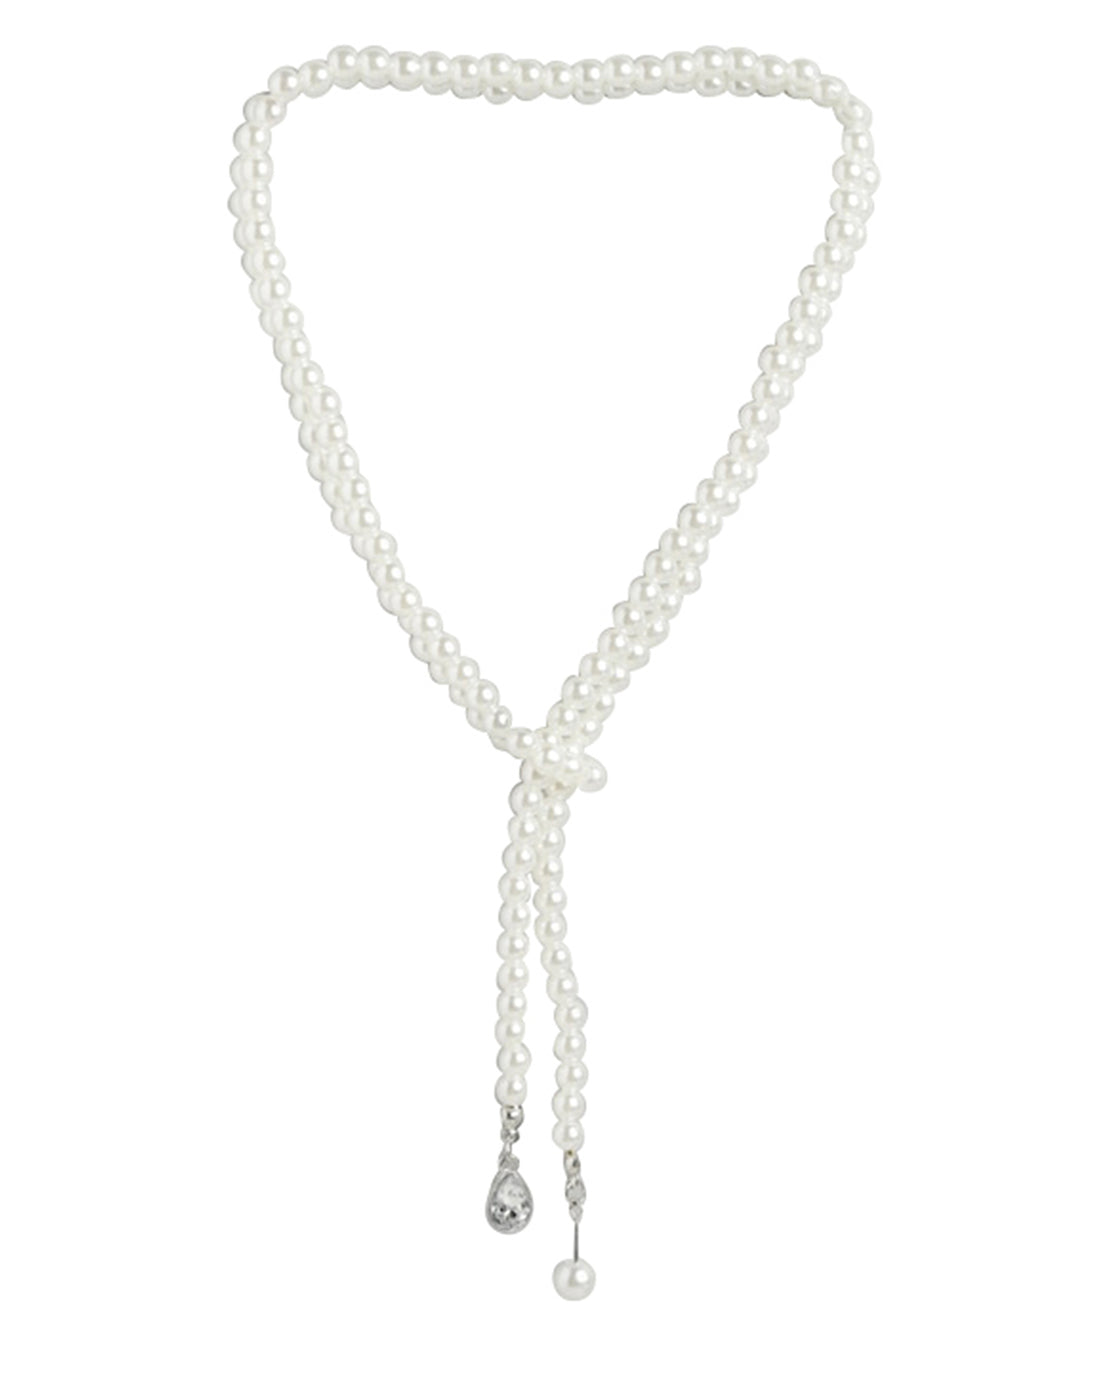 Rhodium Plated With Inline Pearl Stylish Lariat Necklace For Women